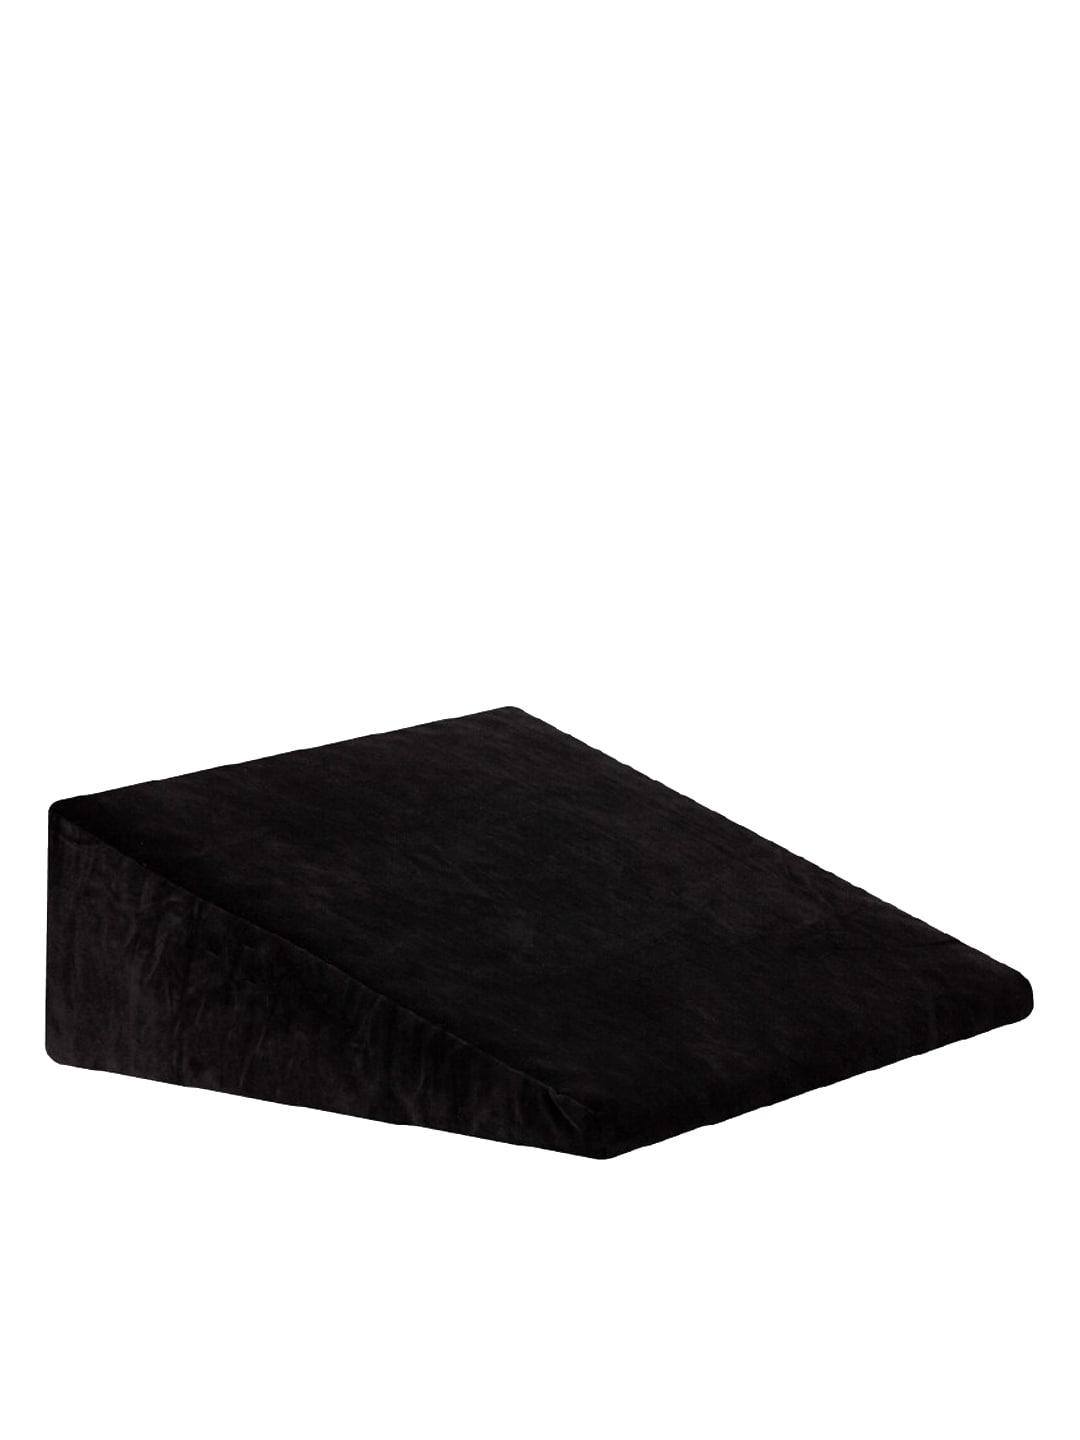 The White Willow Black Cooling Gel Memory Foam Wedge Pillow Price in India